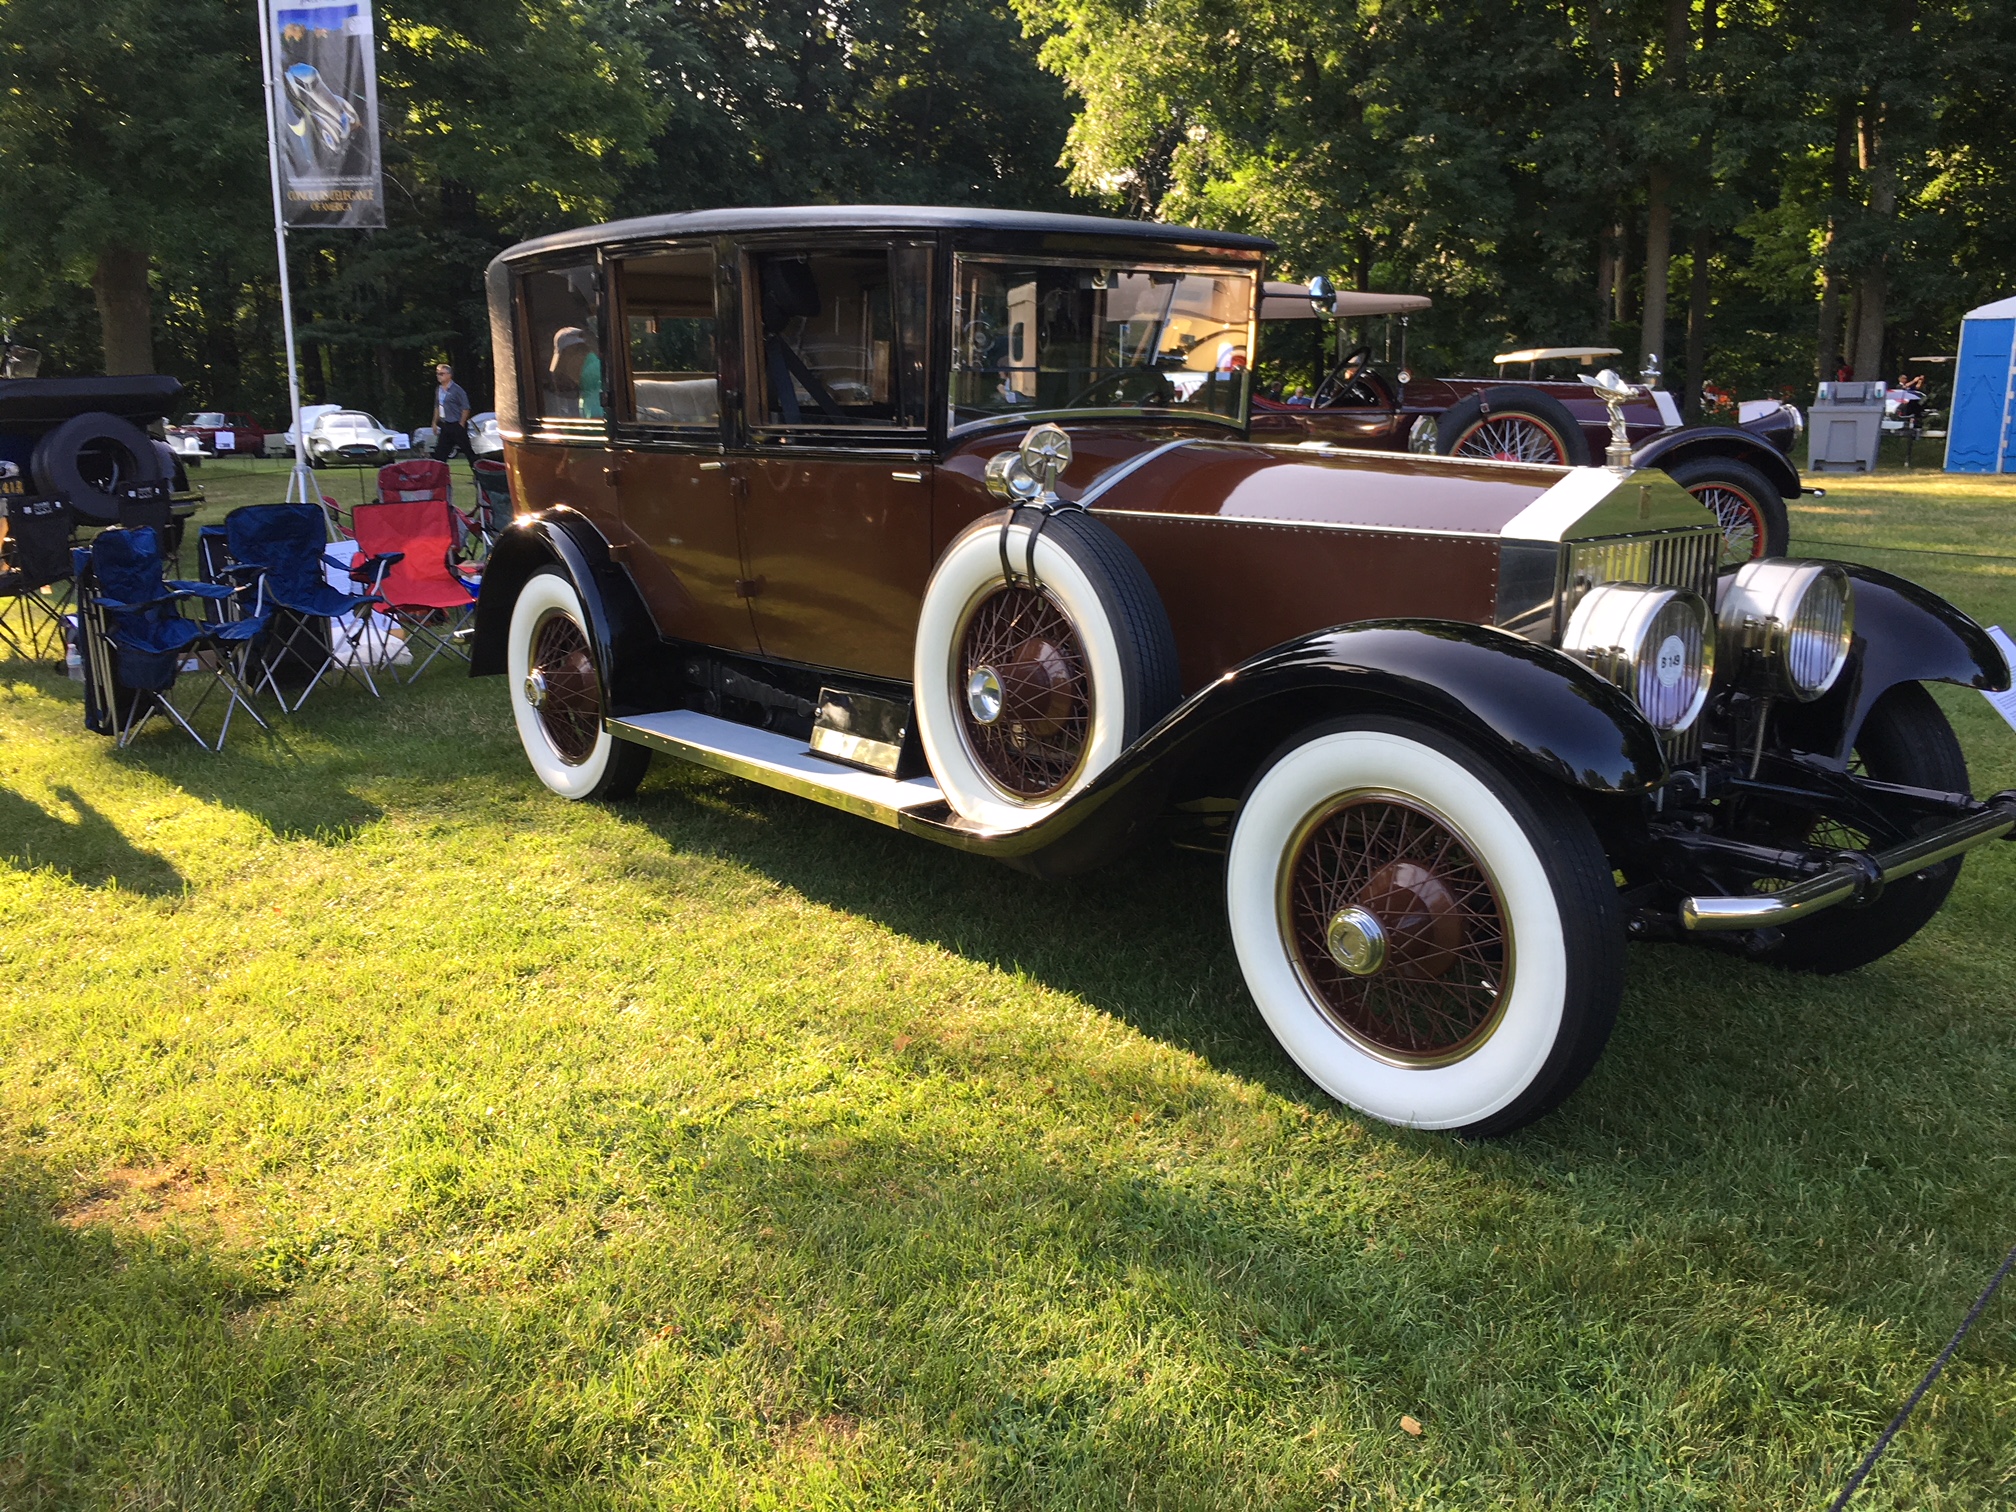  1925 Rolls-Royce Silver Ghost Buckingham Limousine, owned by SSR member Wendell Smith 